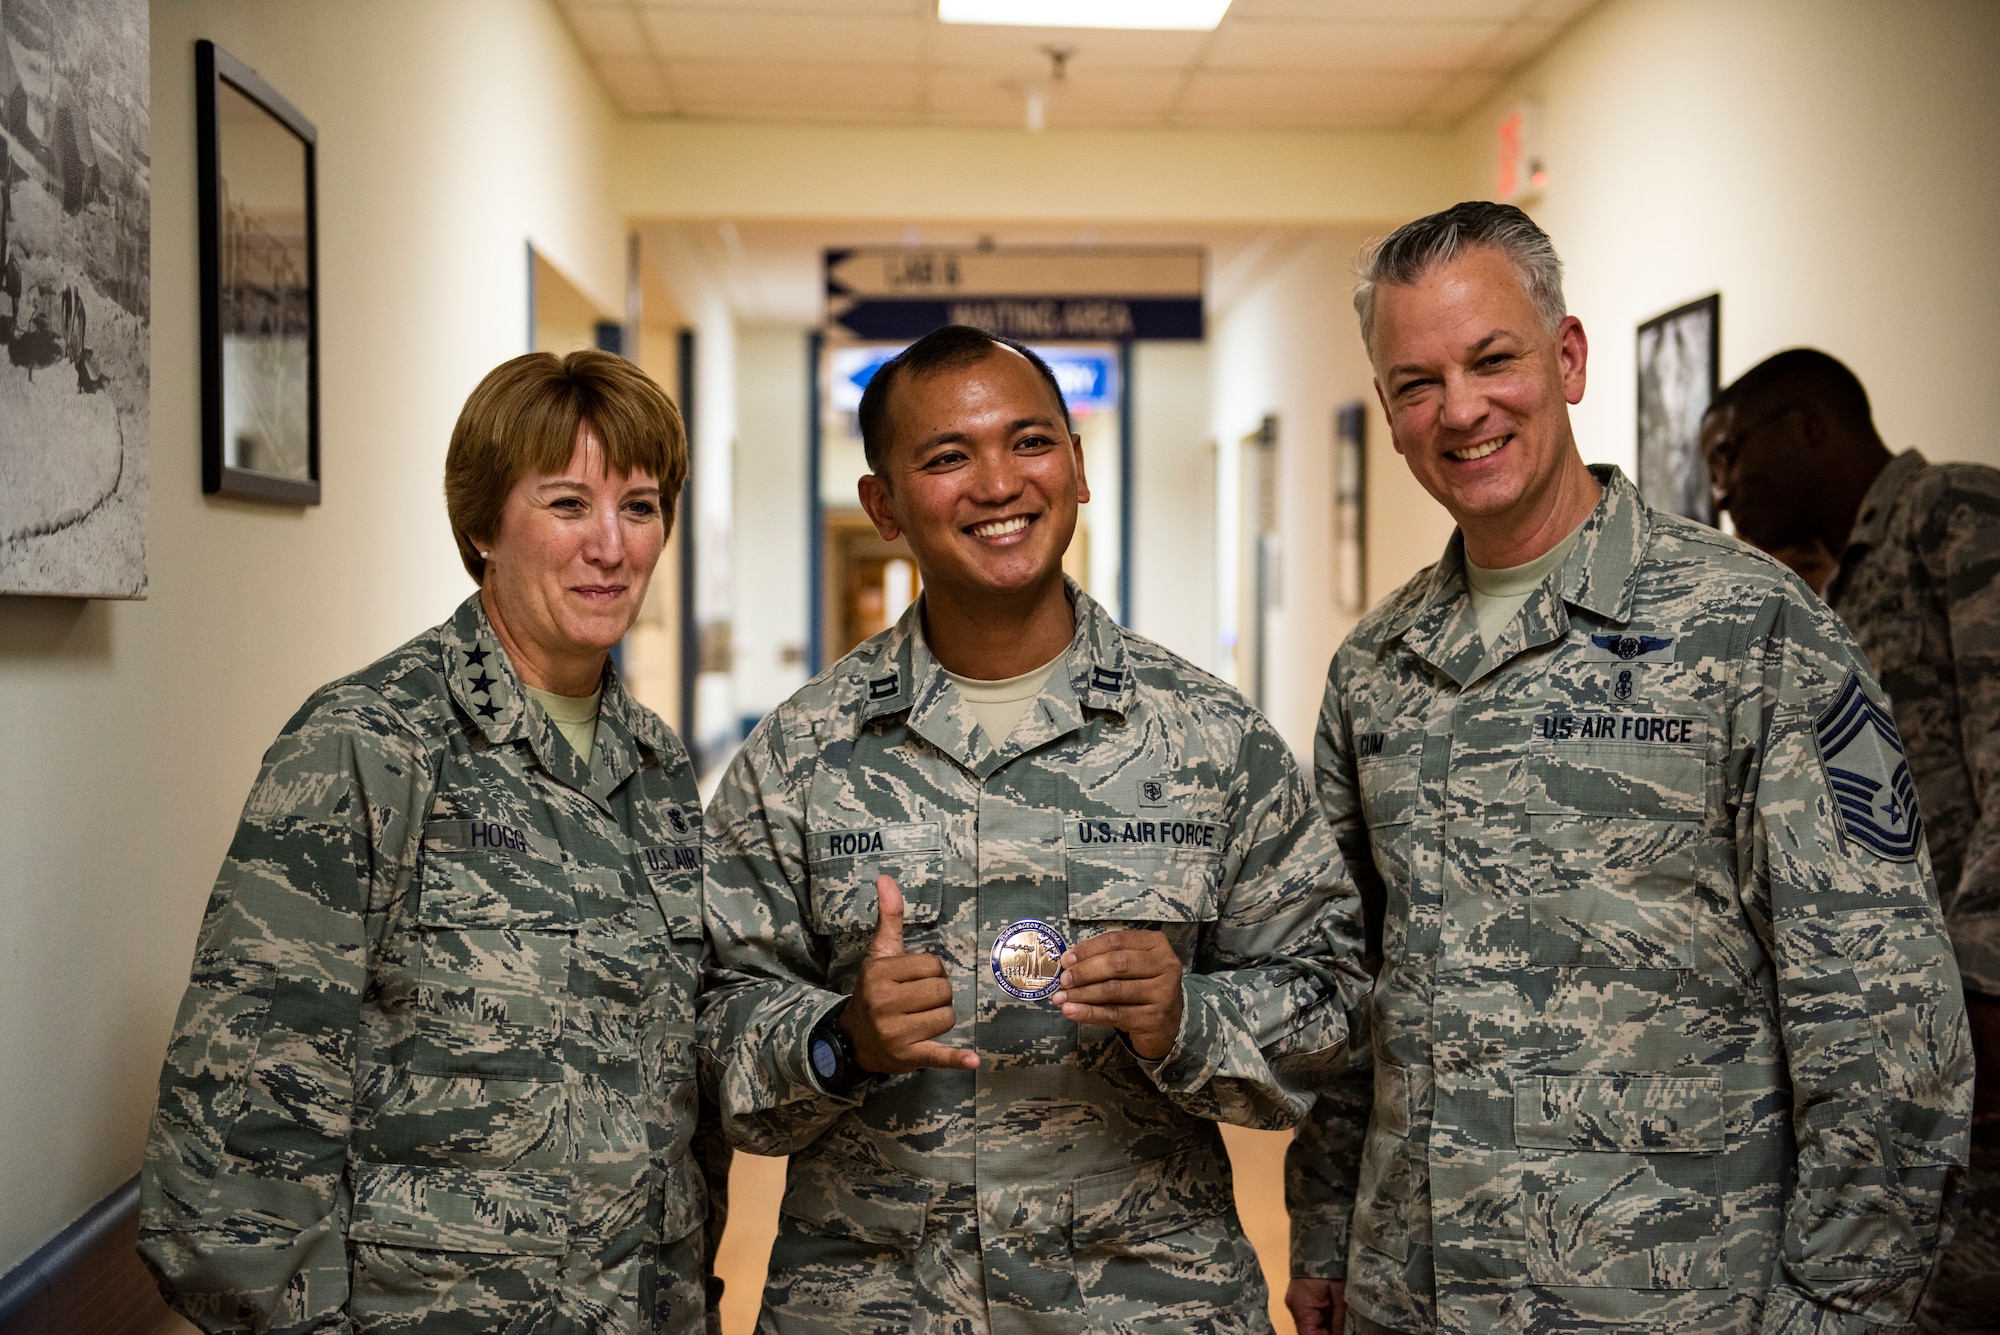 U.S. Air Force Capt. Czar Jose Roda, 8th Medical Group resource management and flight commander support staff flight commander (middle) poses for a picture with Lt. Gen. Dorothy Hogg, Air Force Surgeon General (left), and Chief MSgt. G. Steve Cum, Chief of the Medical Enlisted Force (right) at Kunsan Air Base, Republic of Korea, Sept. 25, 2018. Air Force Medical Service leadership toured the 8th MDG to assess their capabilities and talk with the Airmen that work in the clinics.